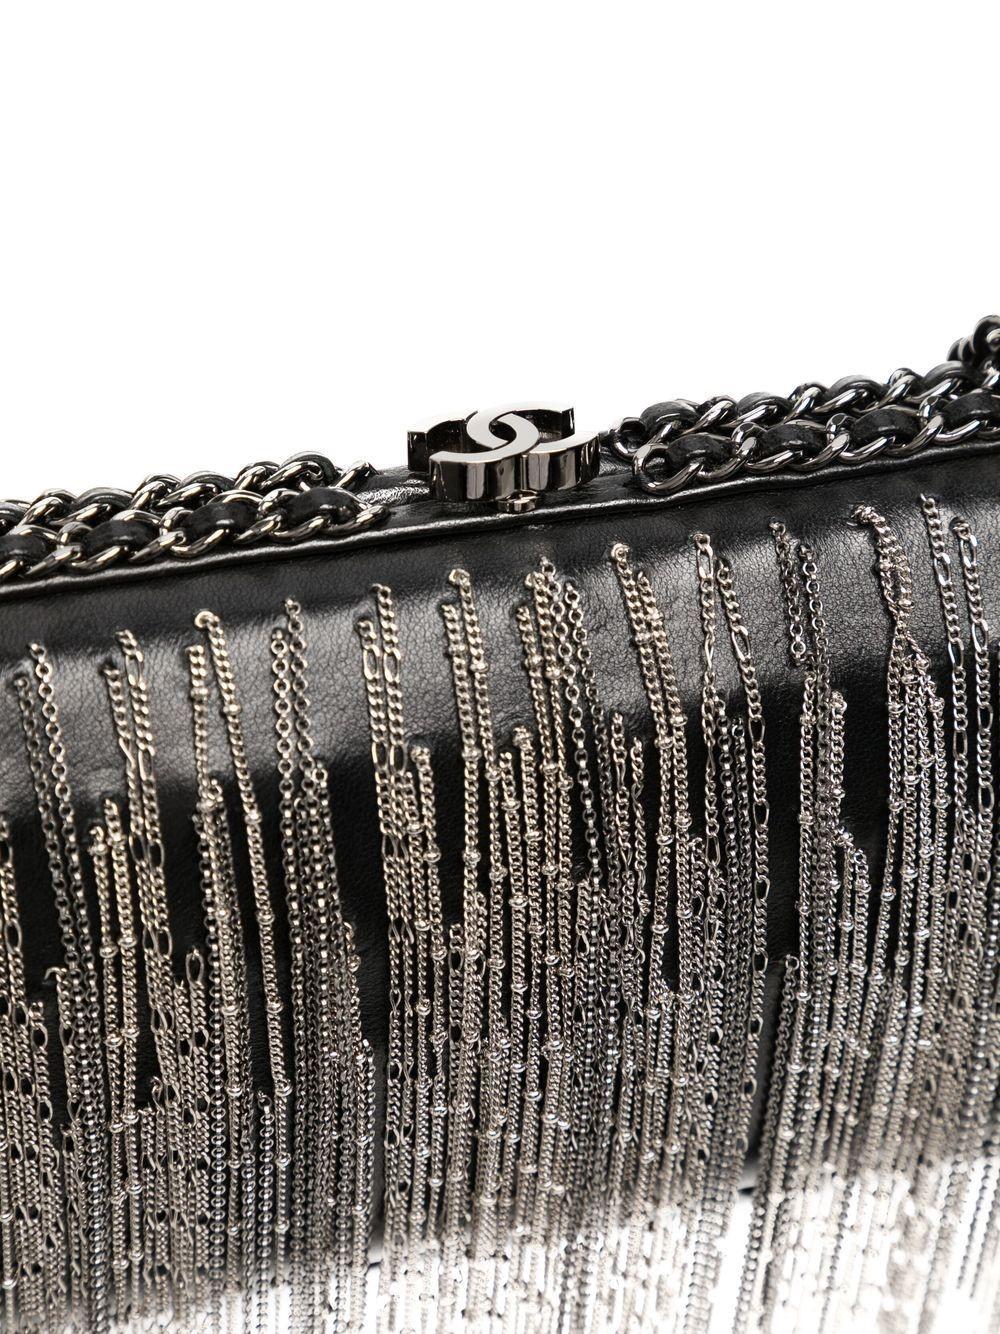 This edgy chain detailed clutch from Chanel comes from their Fall 2017 collection. For this collection, the runway Karl Lagerfeld transformed the Grand Palais into a space station and featured lots of black, silver and shine, which embodies this